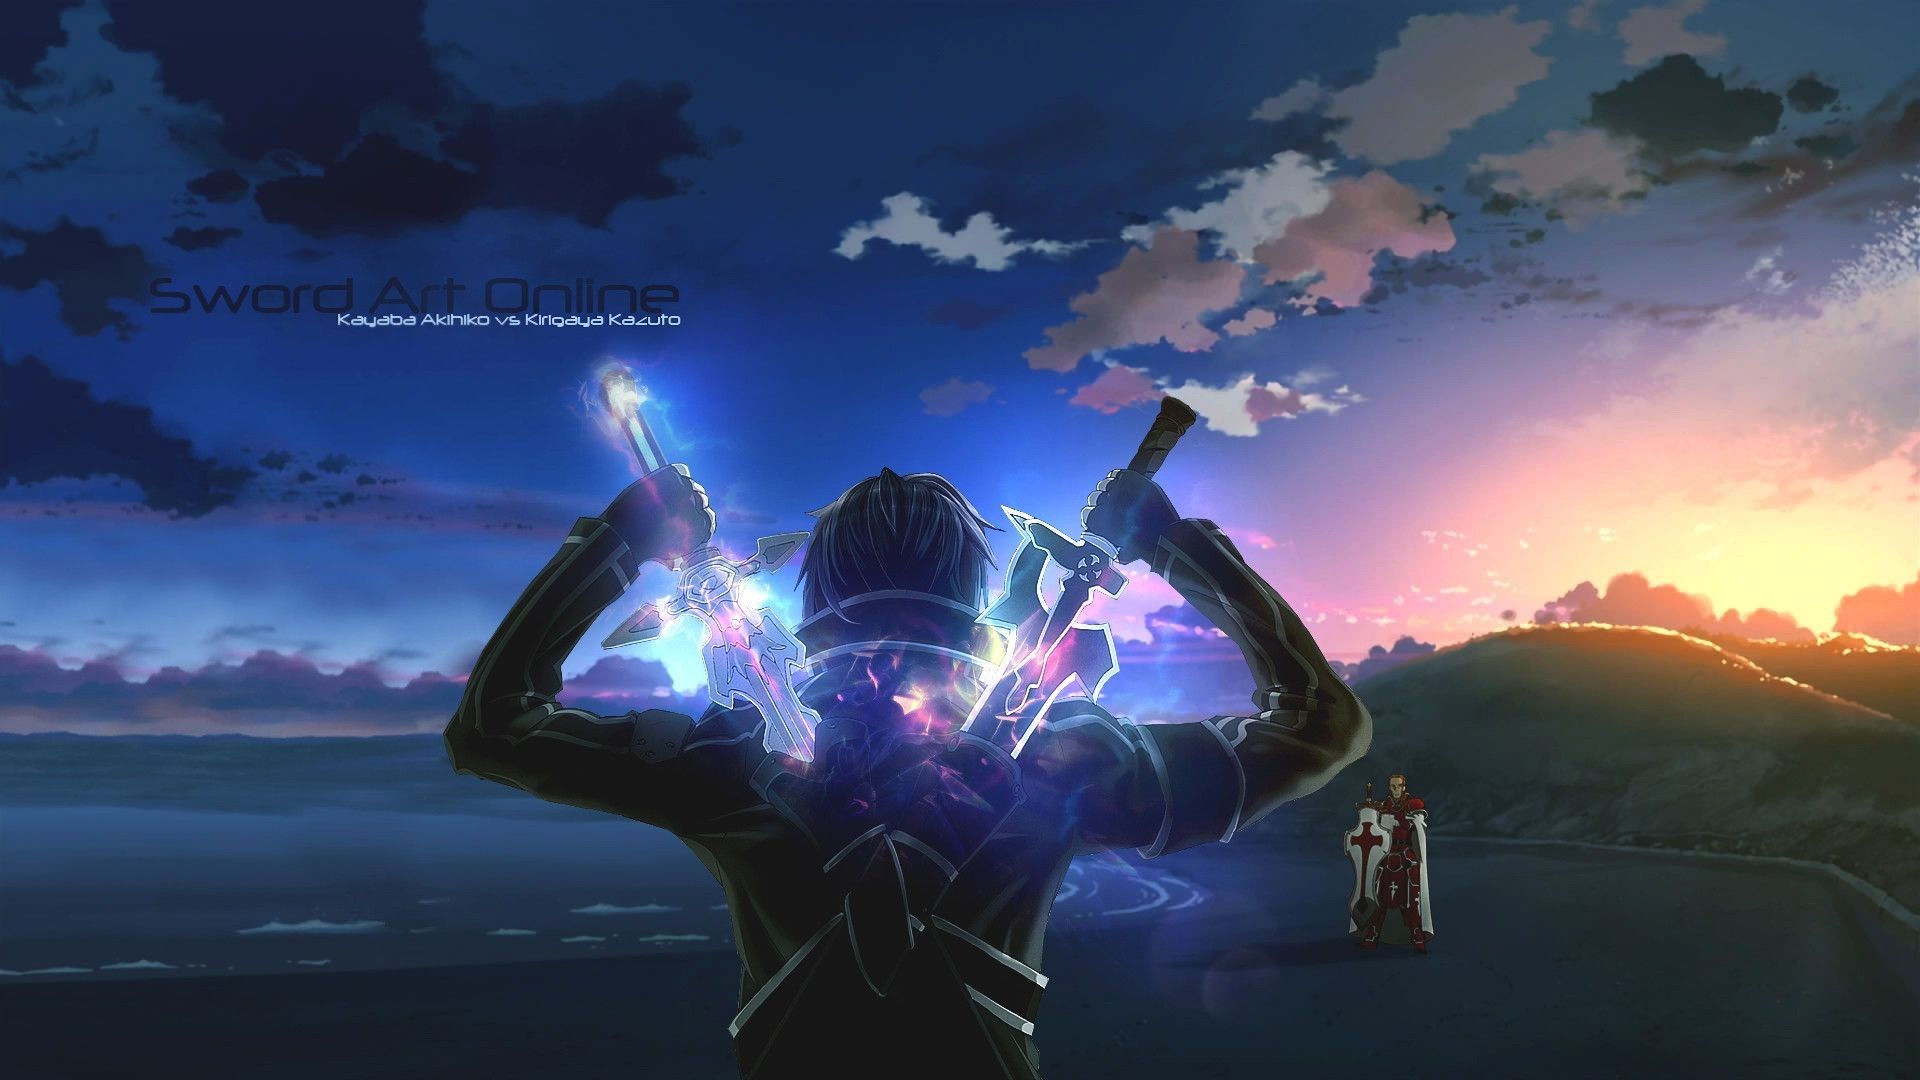 1920x1080 Epic Anime Backgrounds Free Download.